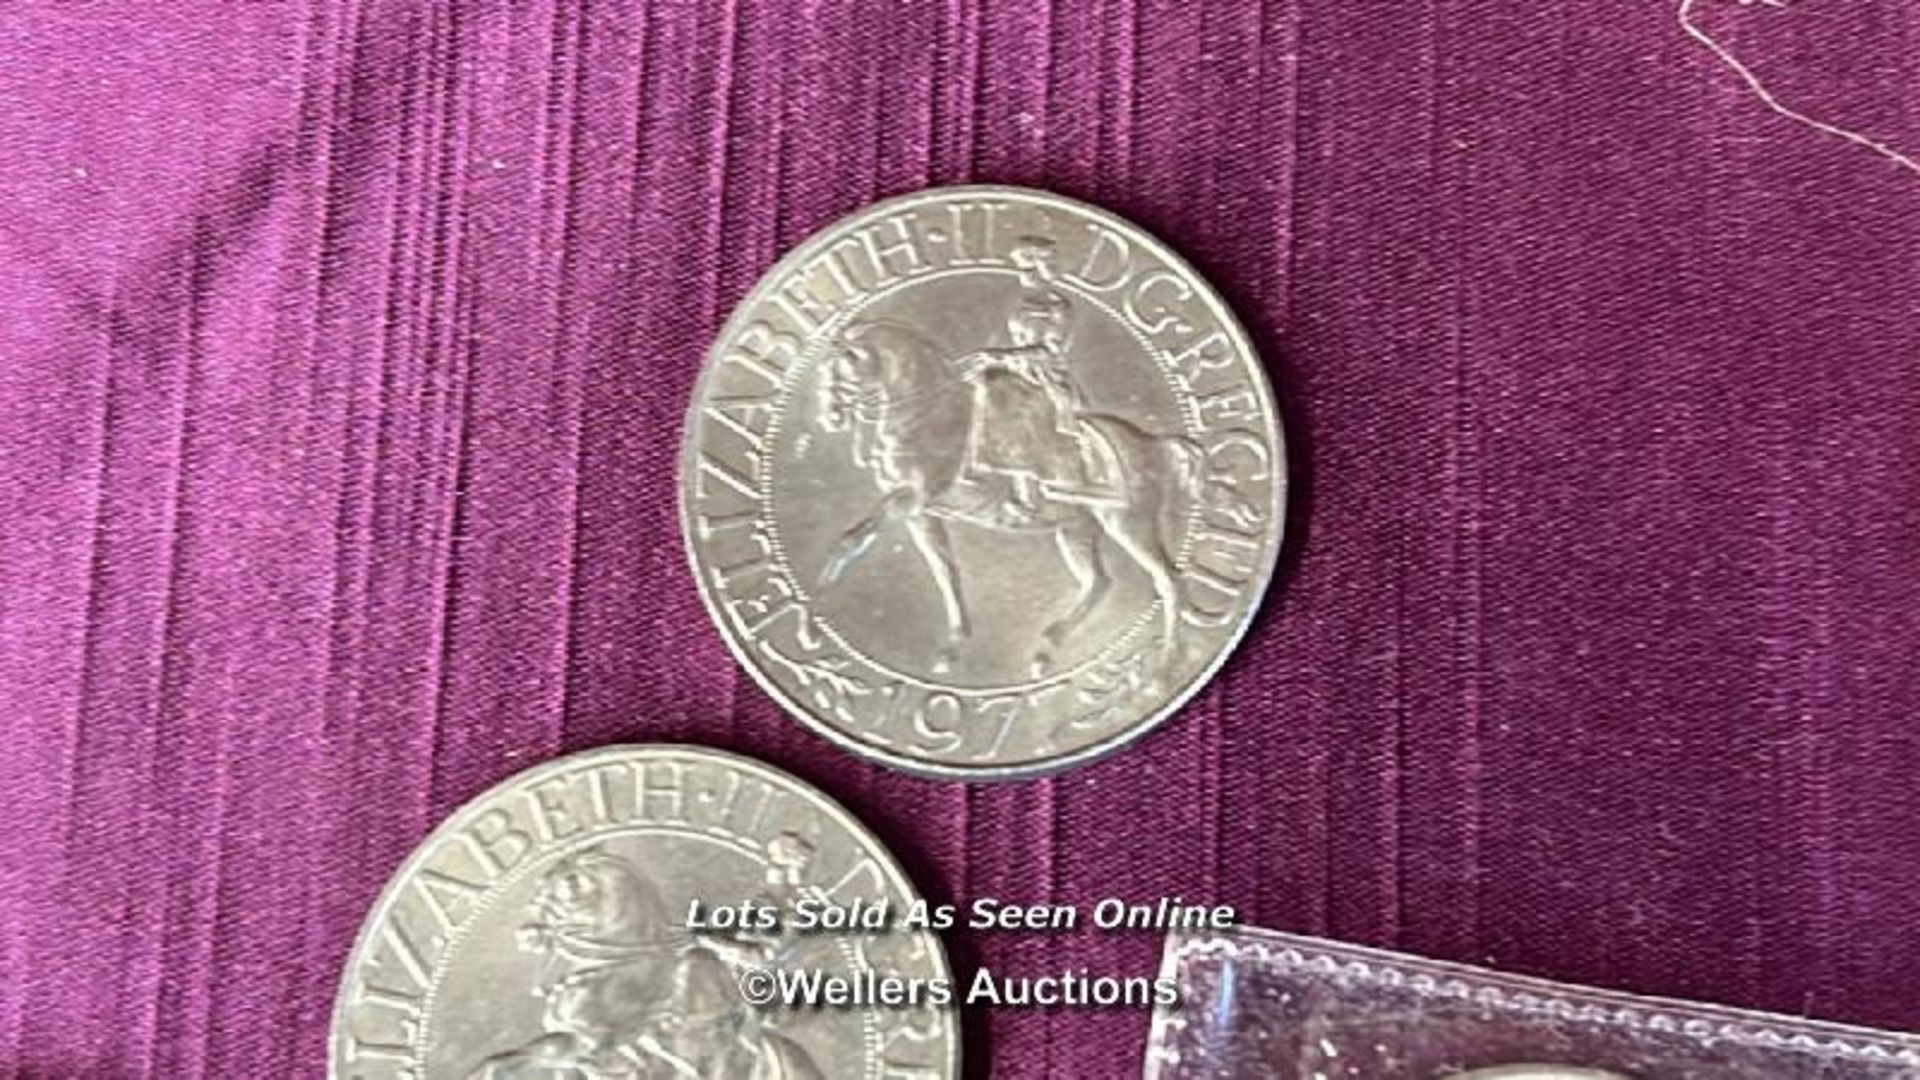 LARGE COLLECTION OF BRITISH COMMEMORATIVE COINS INCLUDING EARLY £1 AND £2 COINS AND SILVER JUBILEE - Image 9 of 9